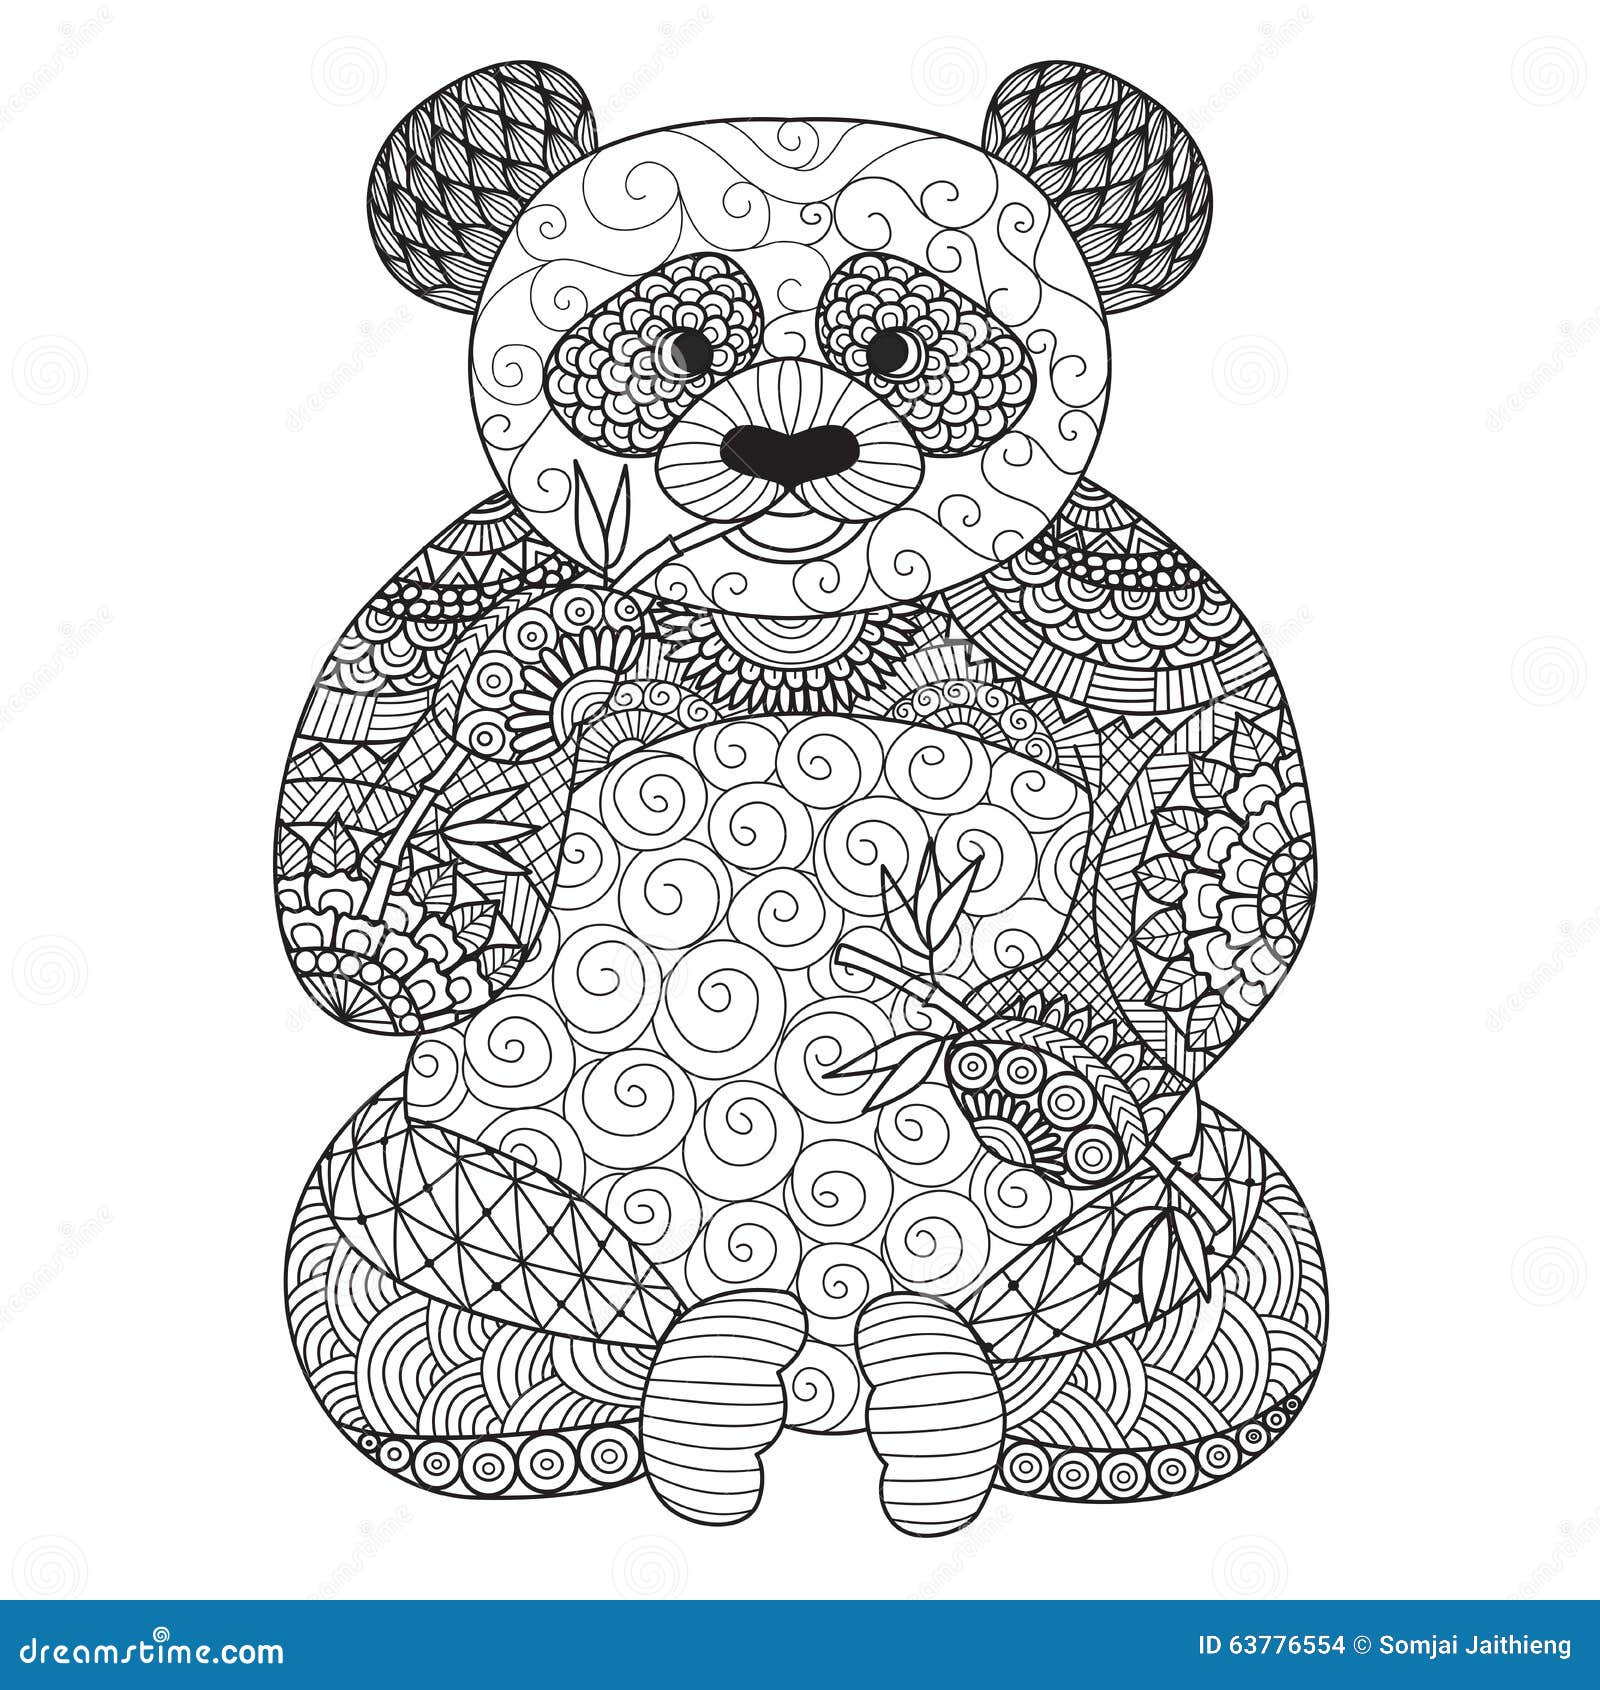 hand drawn zentangle panda for coloring book for adult,tattoo, shirt ,logo and so on